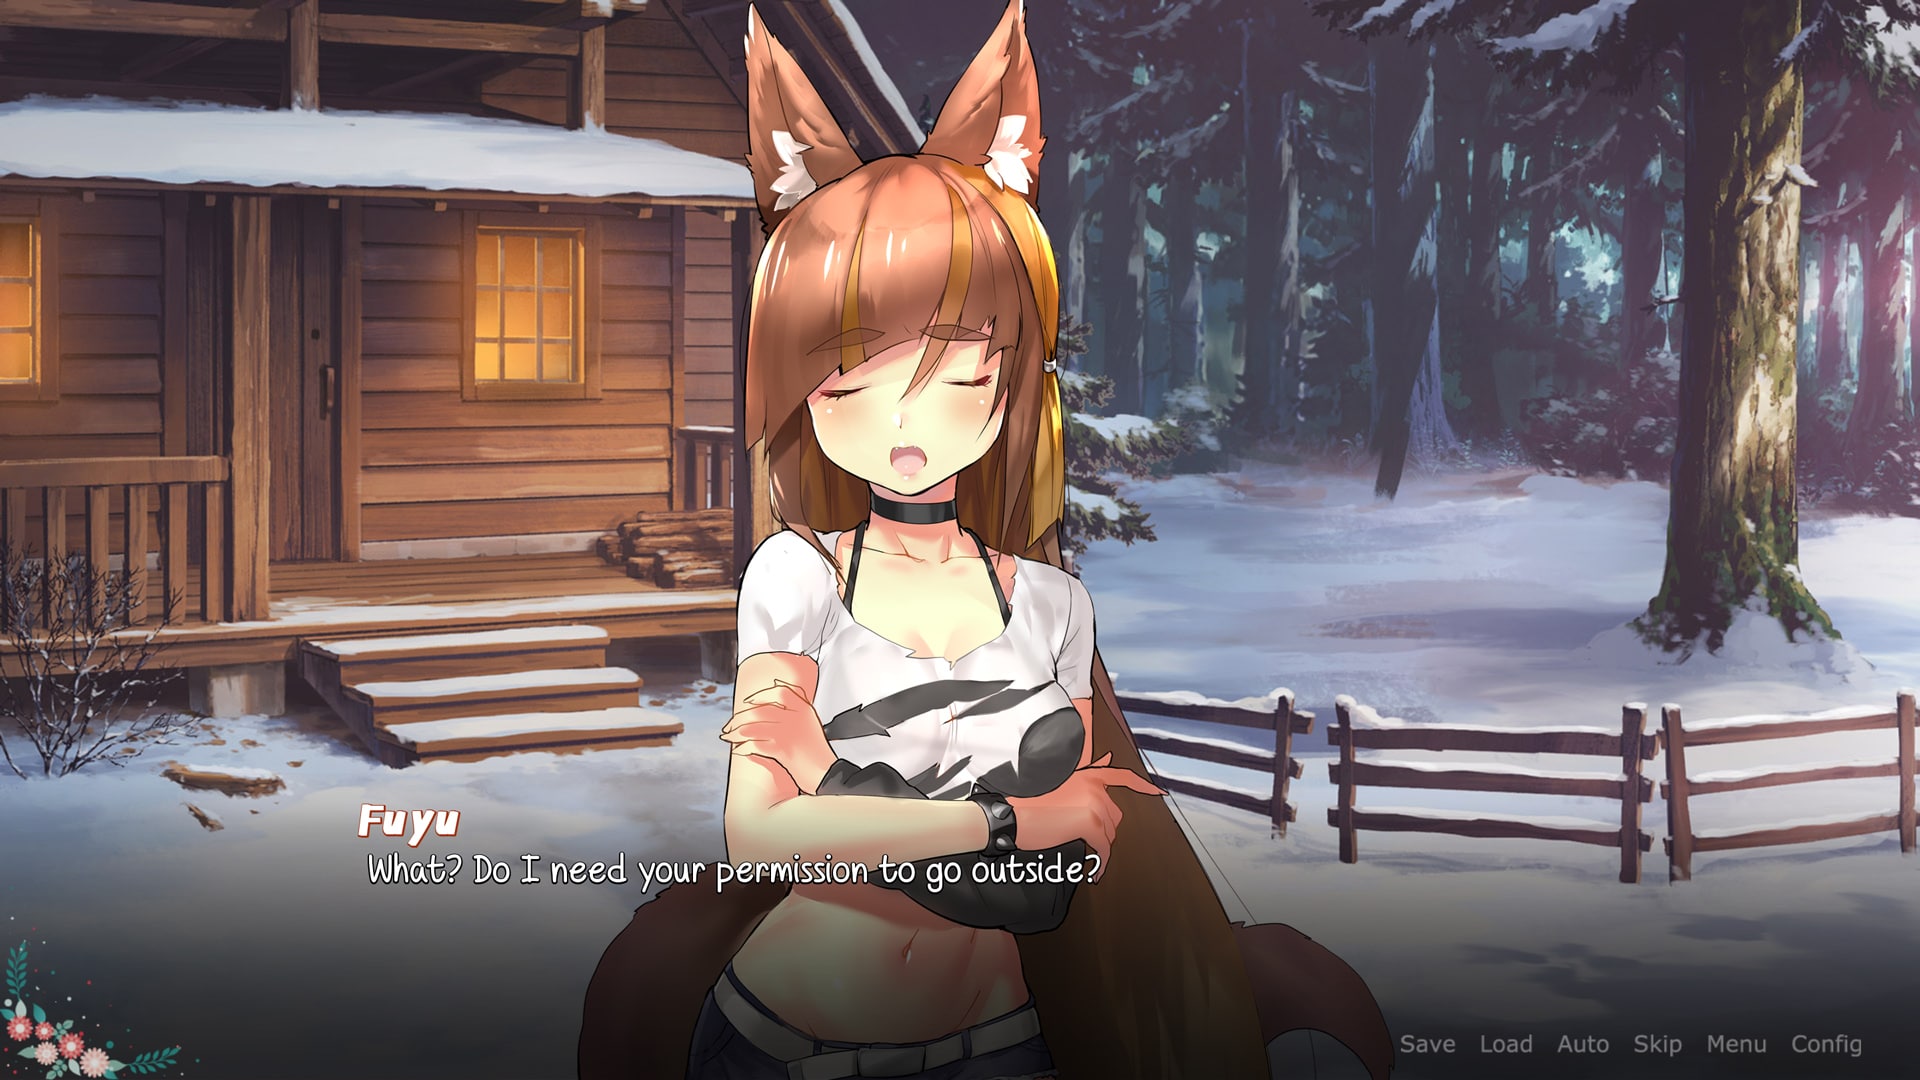 wolf girl with you full download